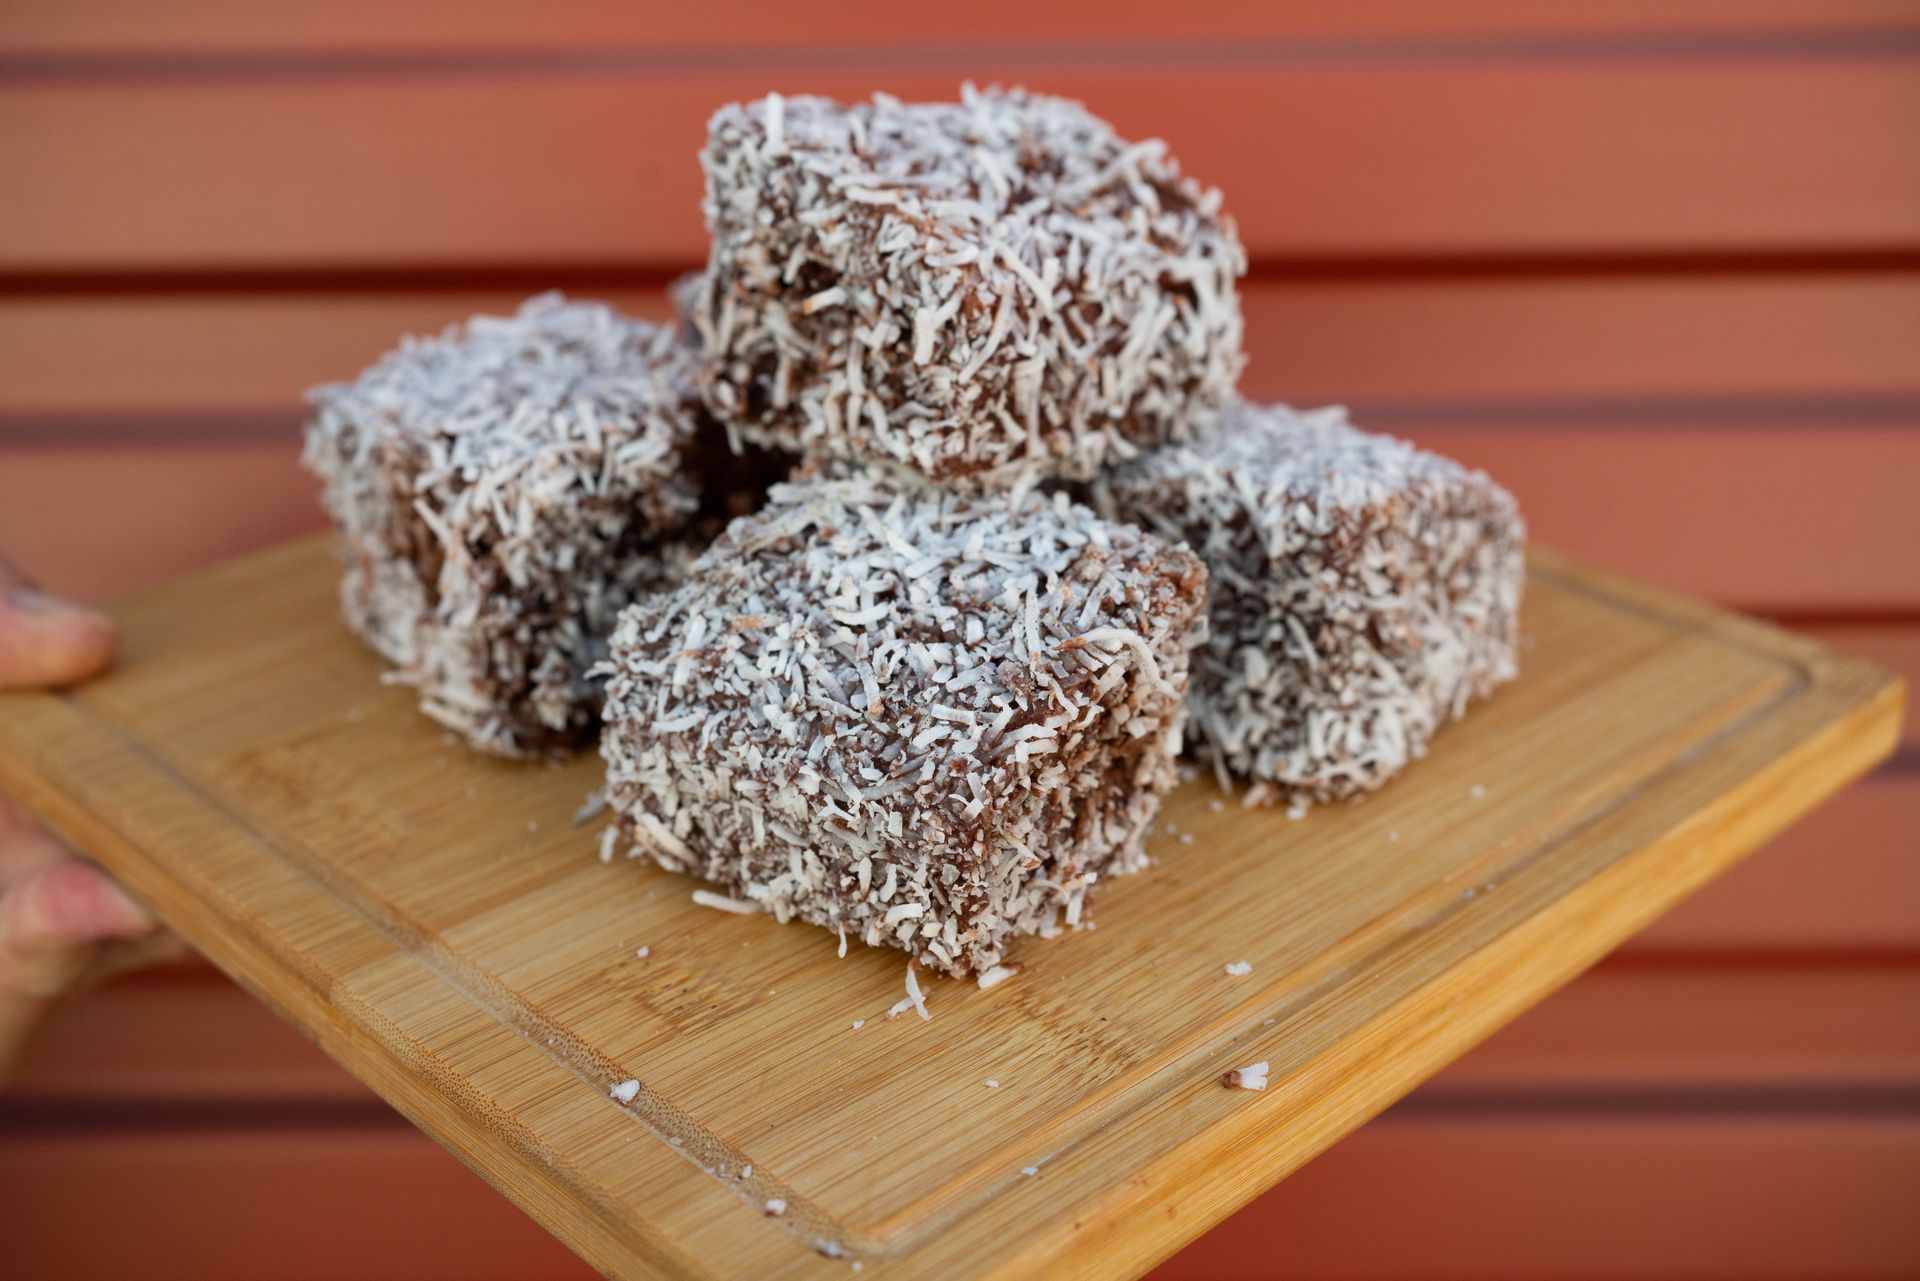 Lamingtons, light sponge coated in decident chocolate and coconut